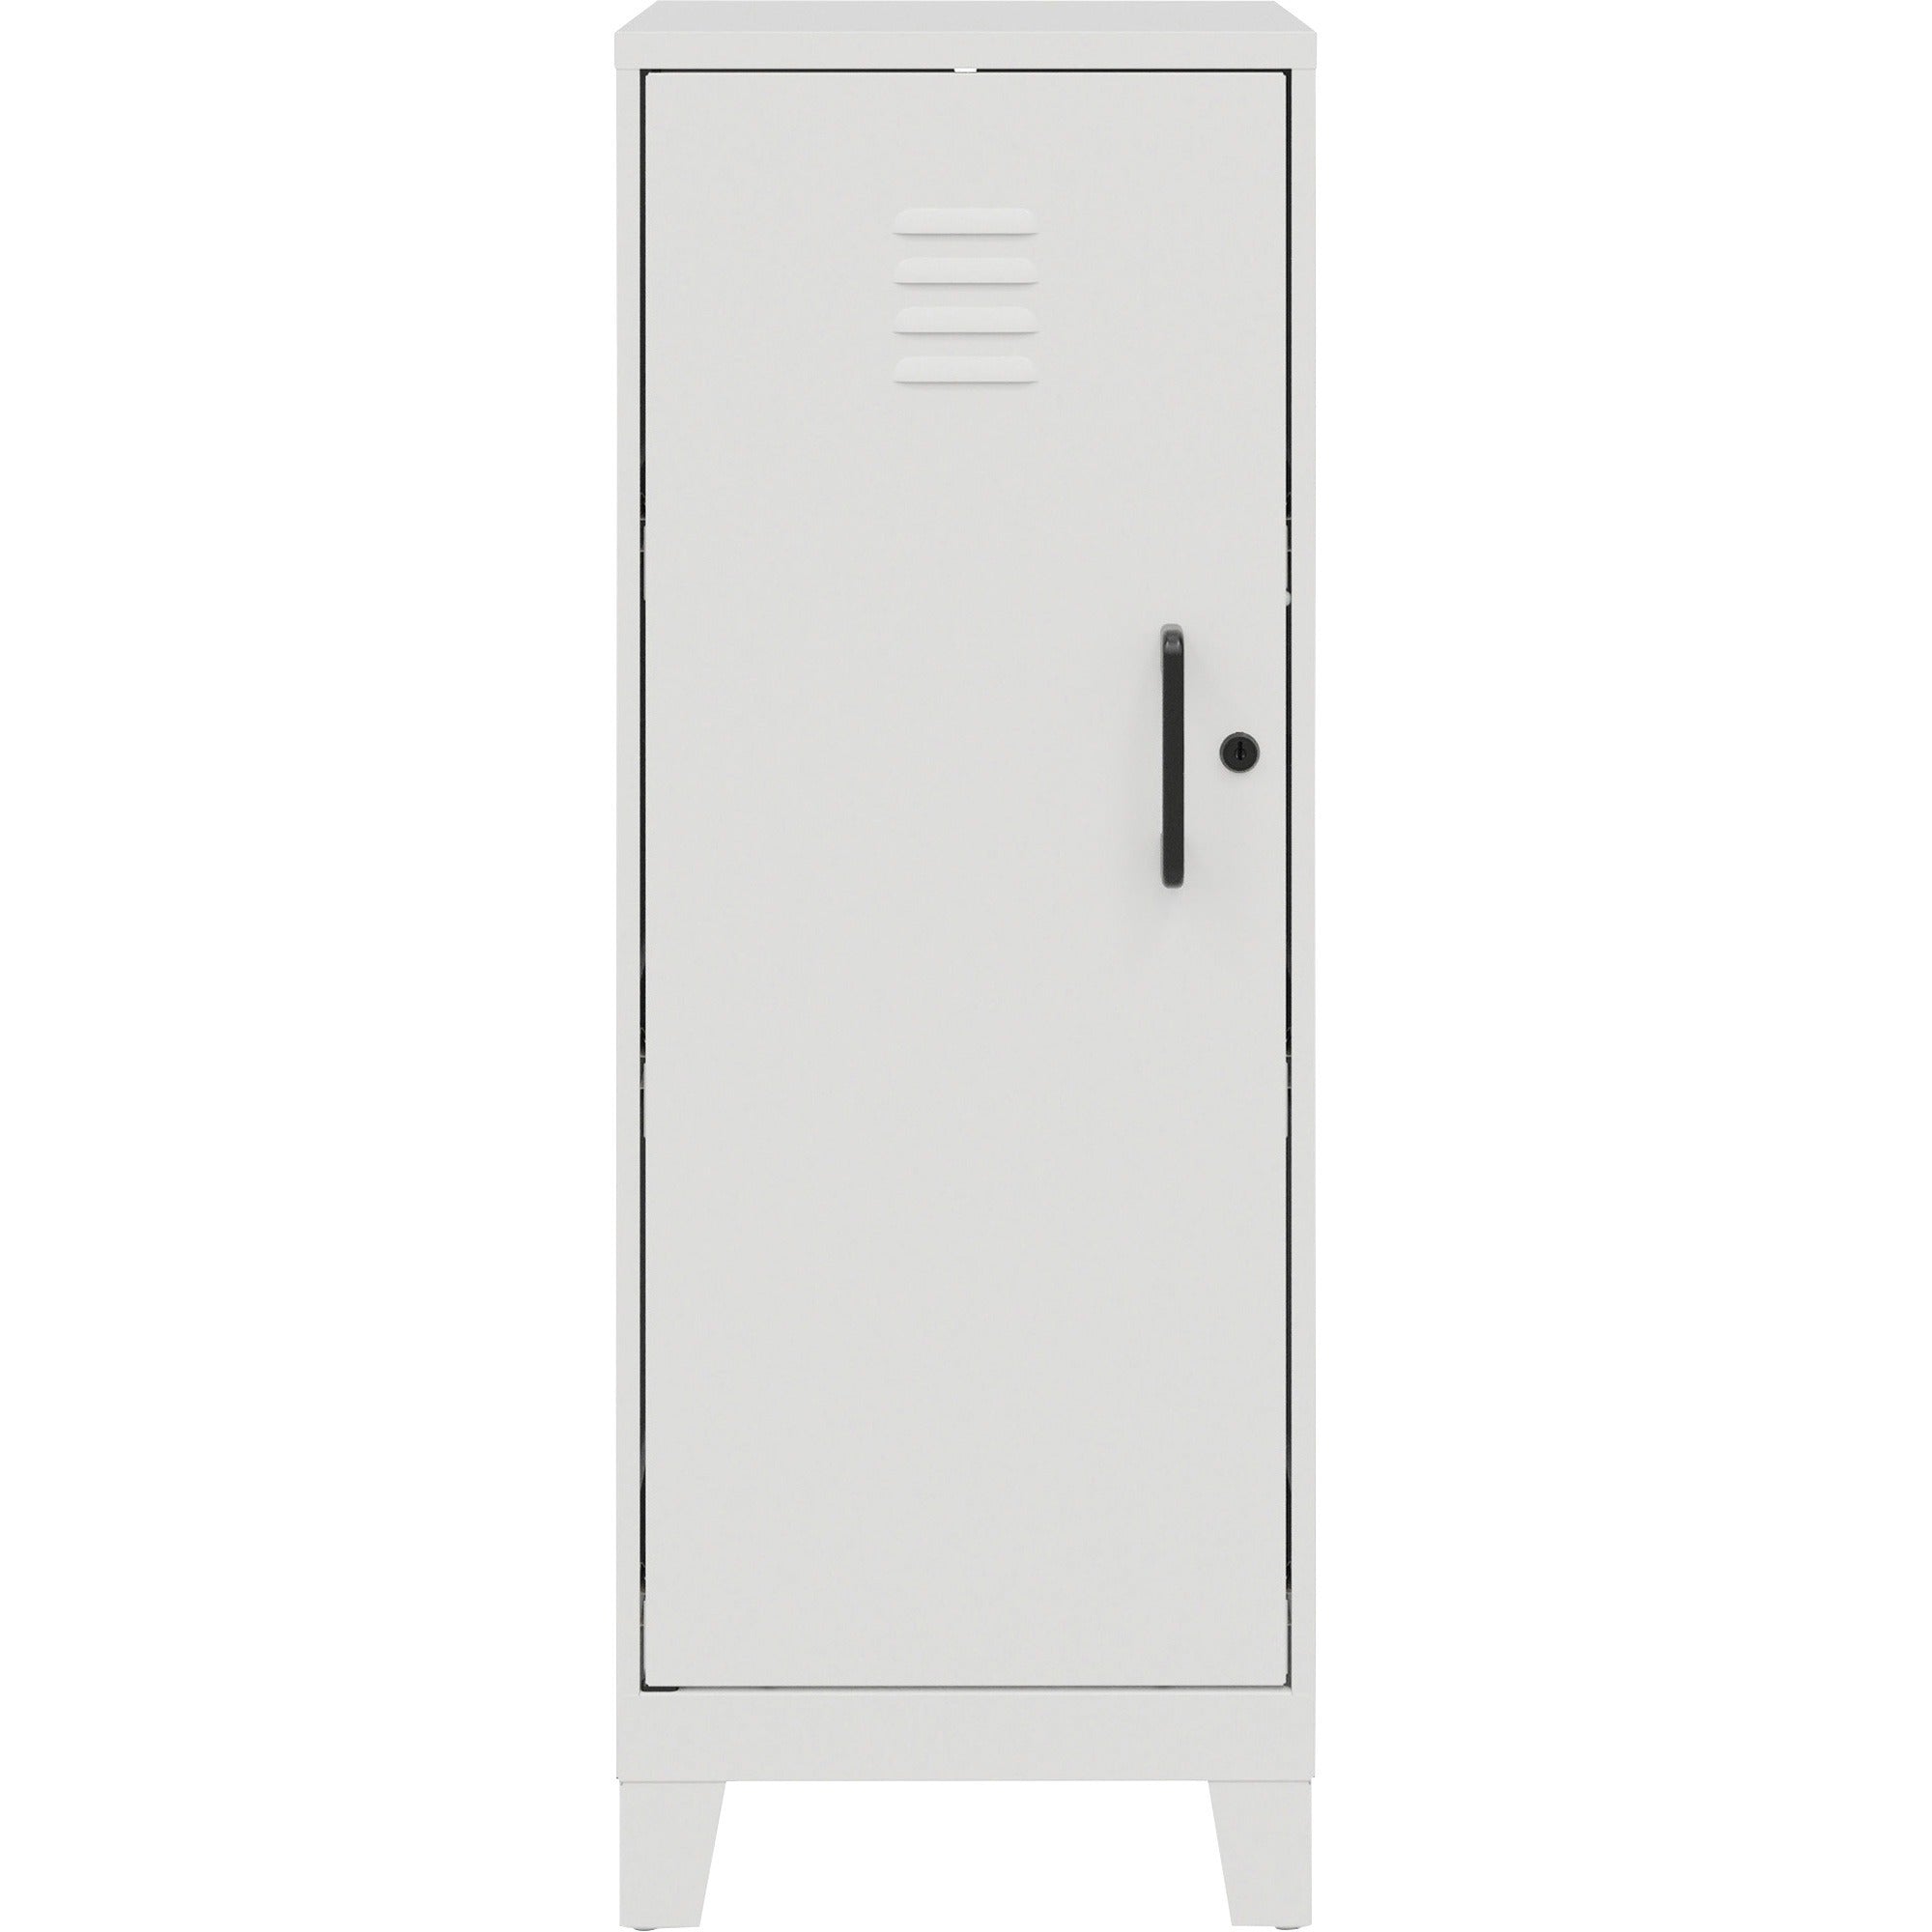 nusparc-personal-locker-3-shelves-for-office-home-sport-equipments-toy-game-classroom-playroom-basement-garage-overall-size-425-x-142-x-18-white-steel-taa-compliant_nprsl318zzwe - 2